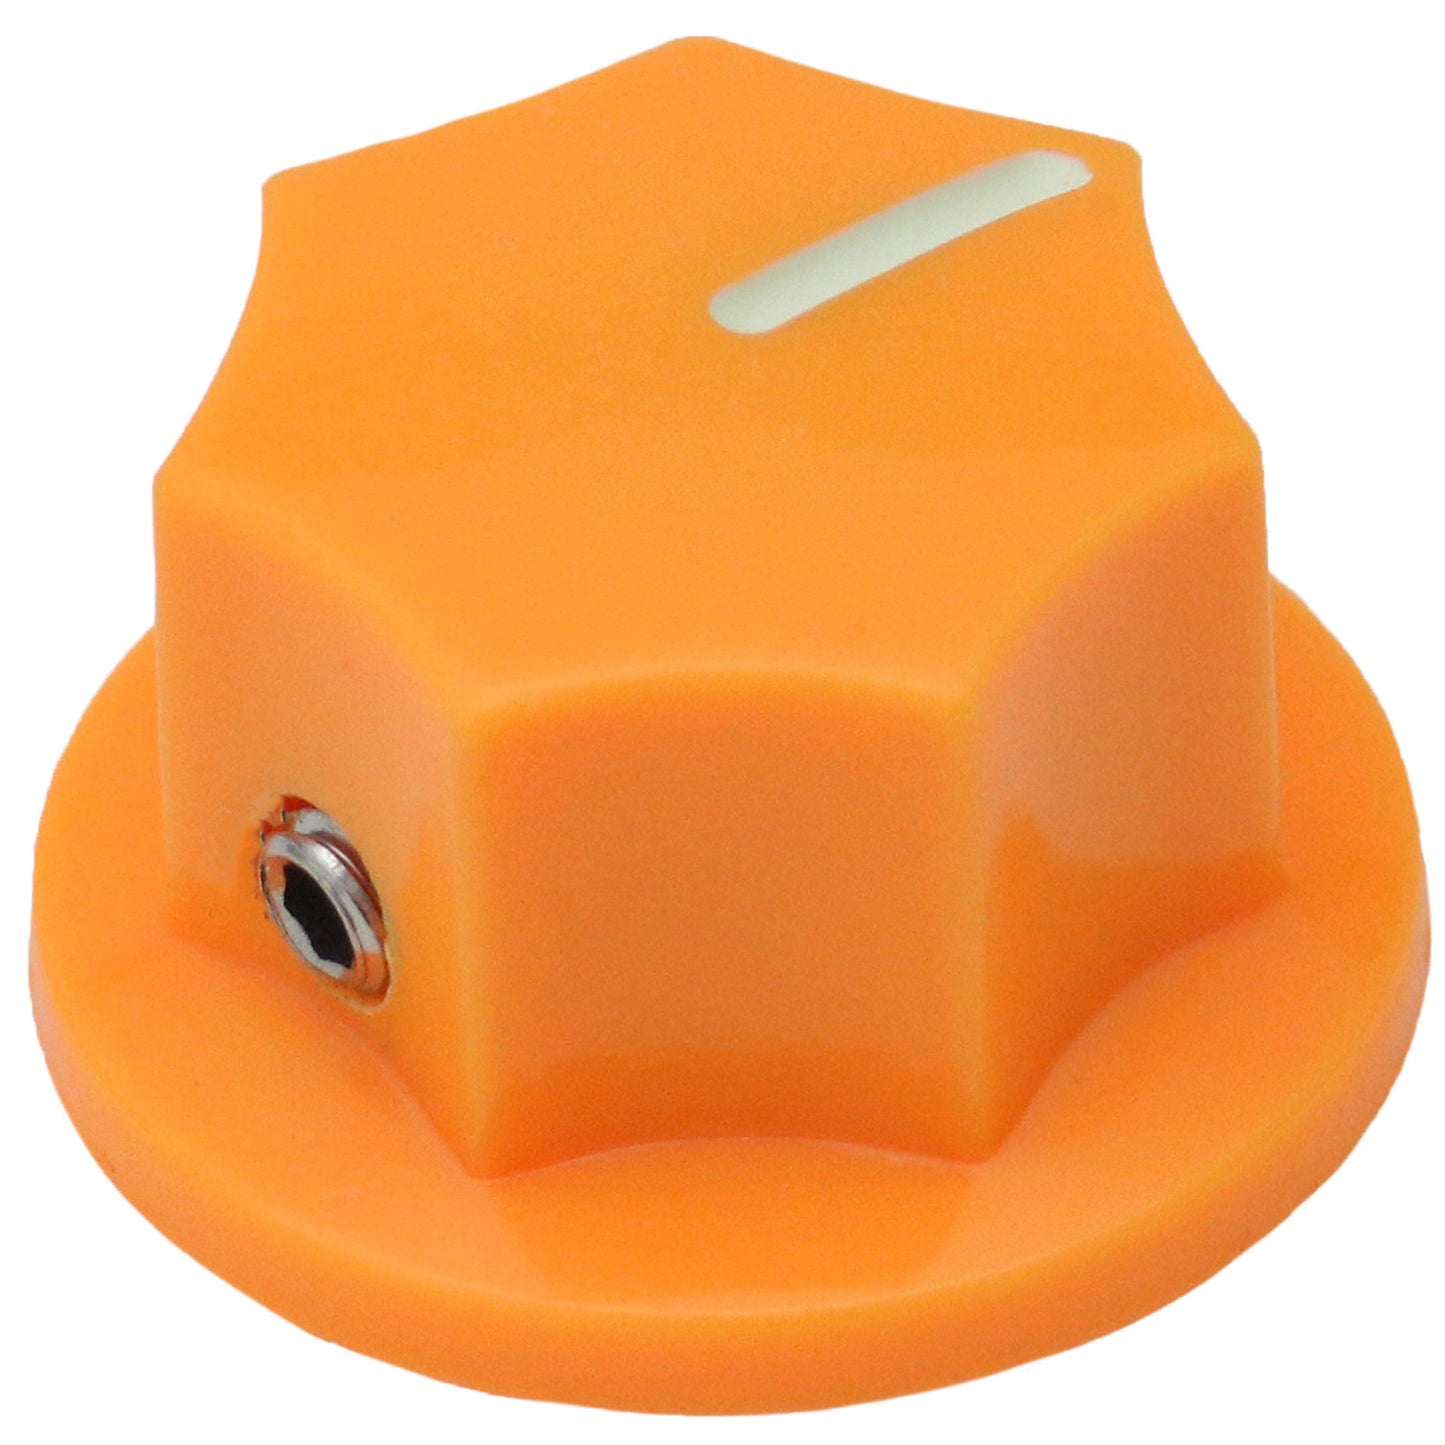 Large Skirted 7-Sided Guitar / Pedal Control Knob